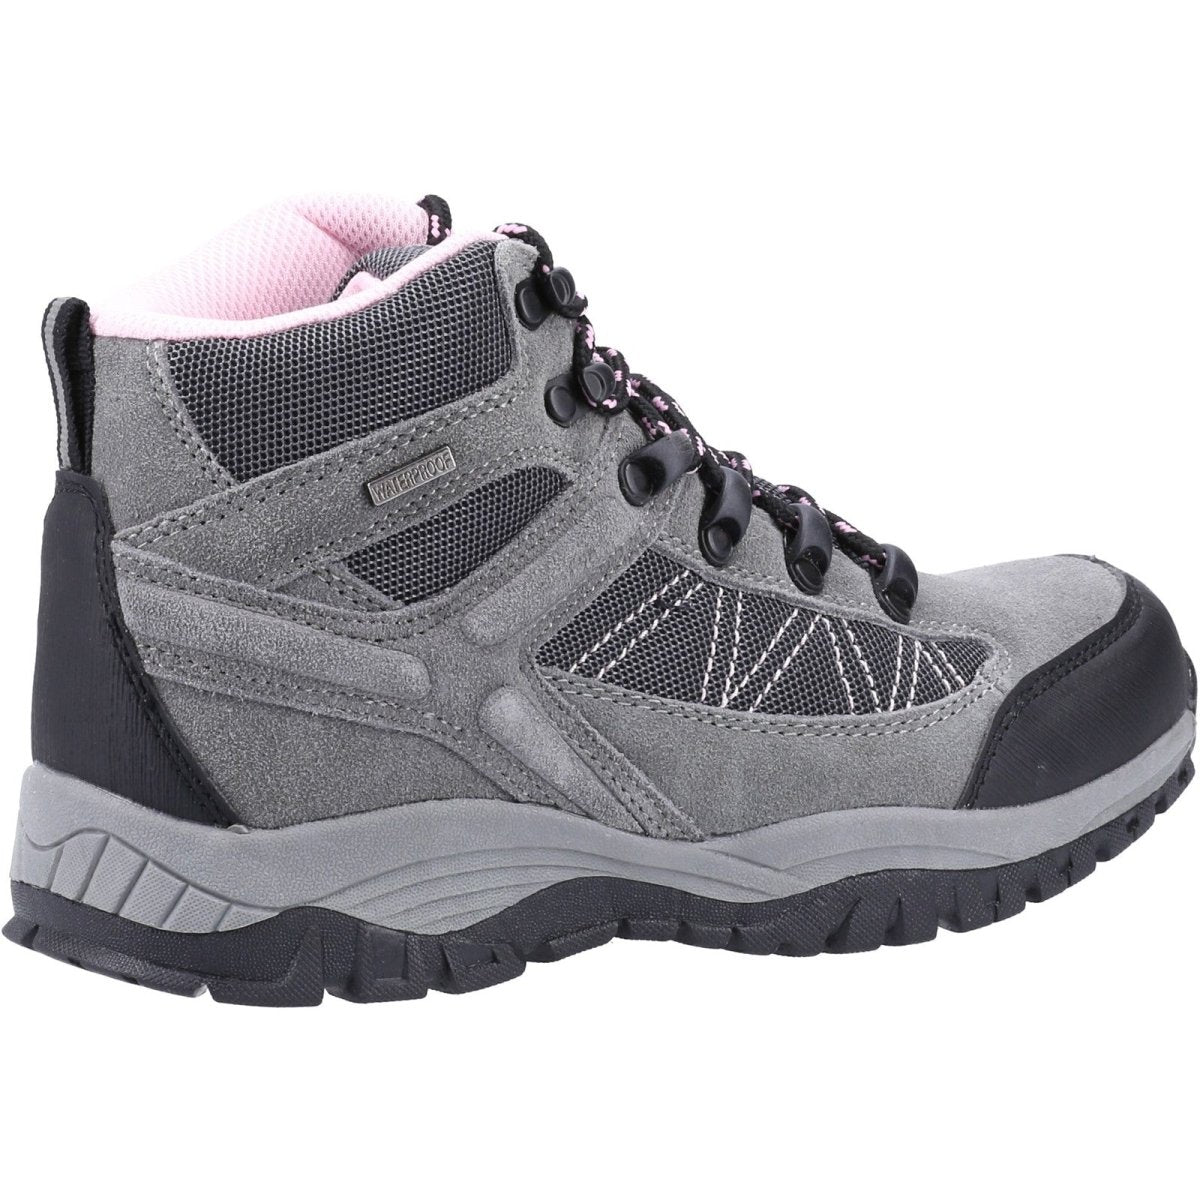 Cotswold Maisemore Ladies Hiking Boots - Shoe Store Direct